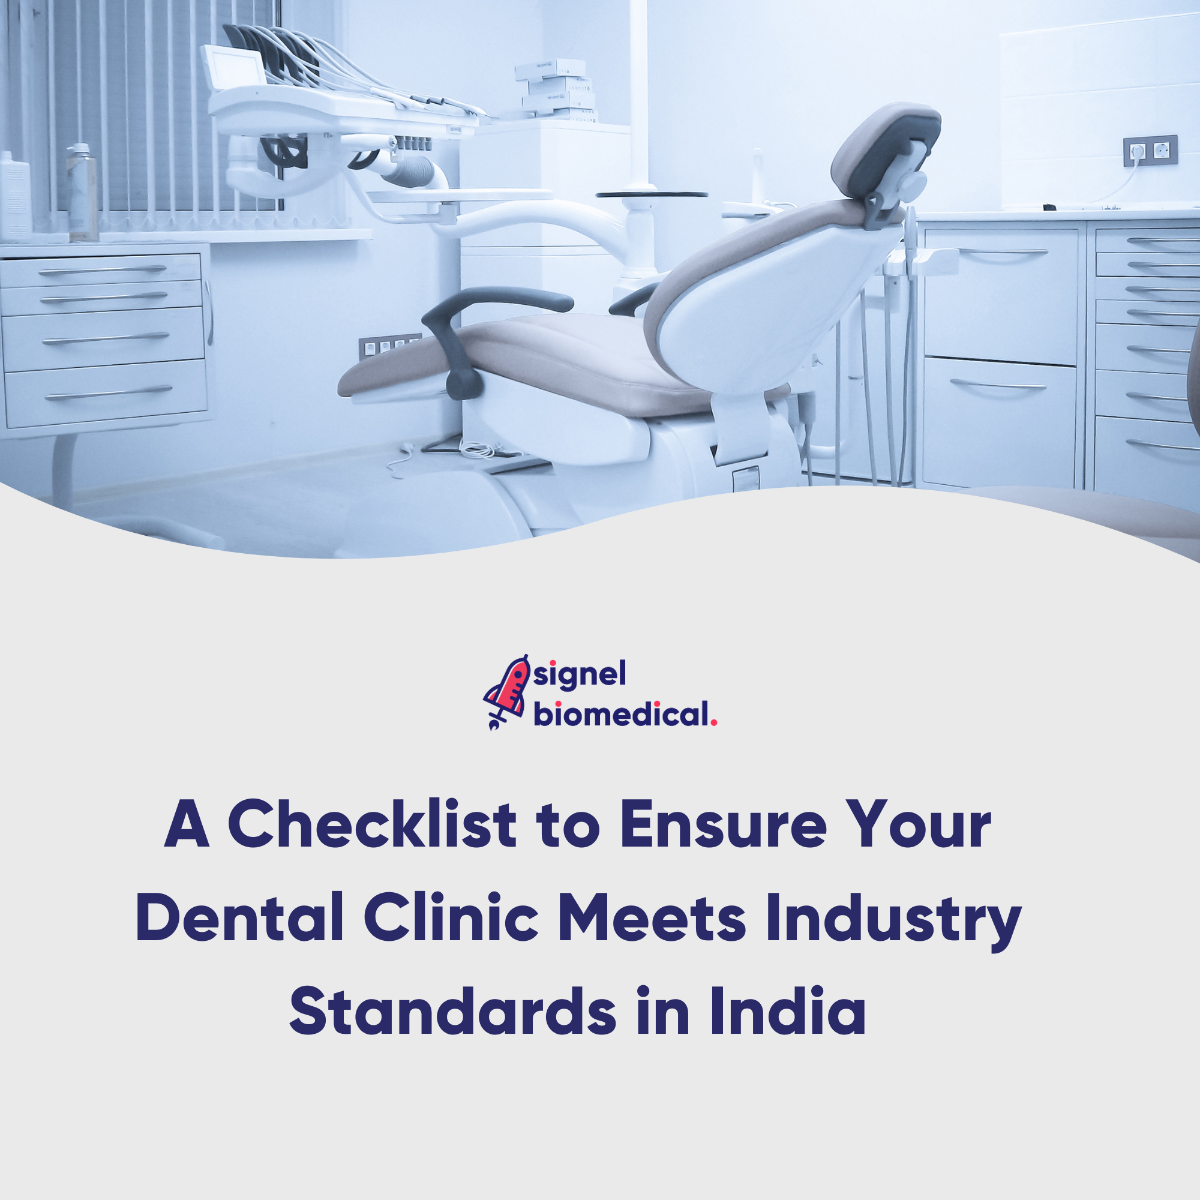 Are you a dental practitioner in India striving